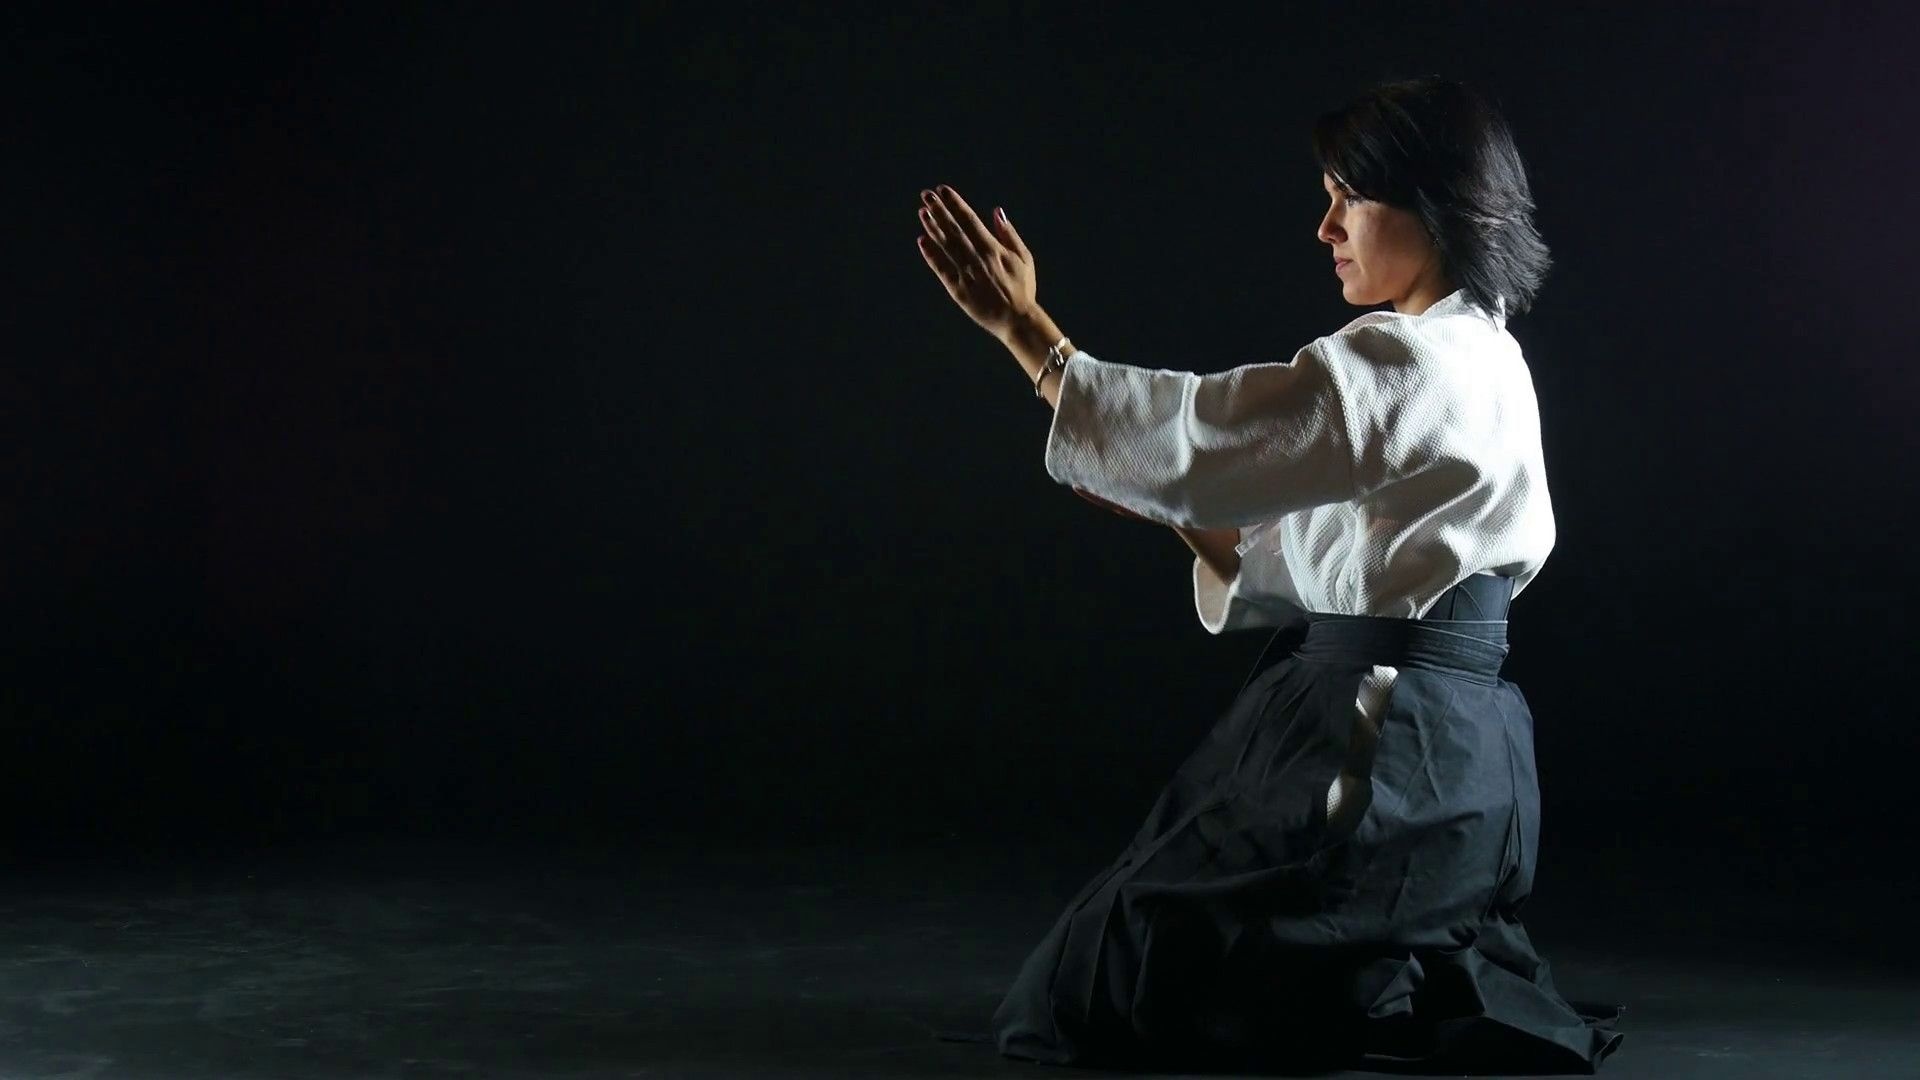 Aikido: Mental training in Japanese martial arts, The ability to relax the mind and body. 1920x1080 Full HD Wallpaper.